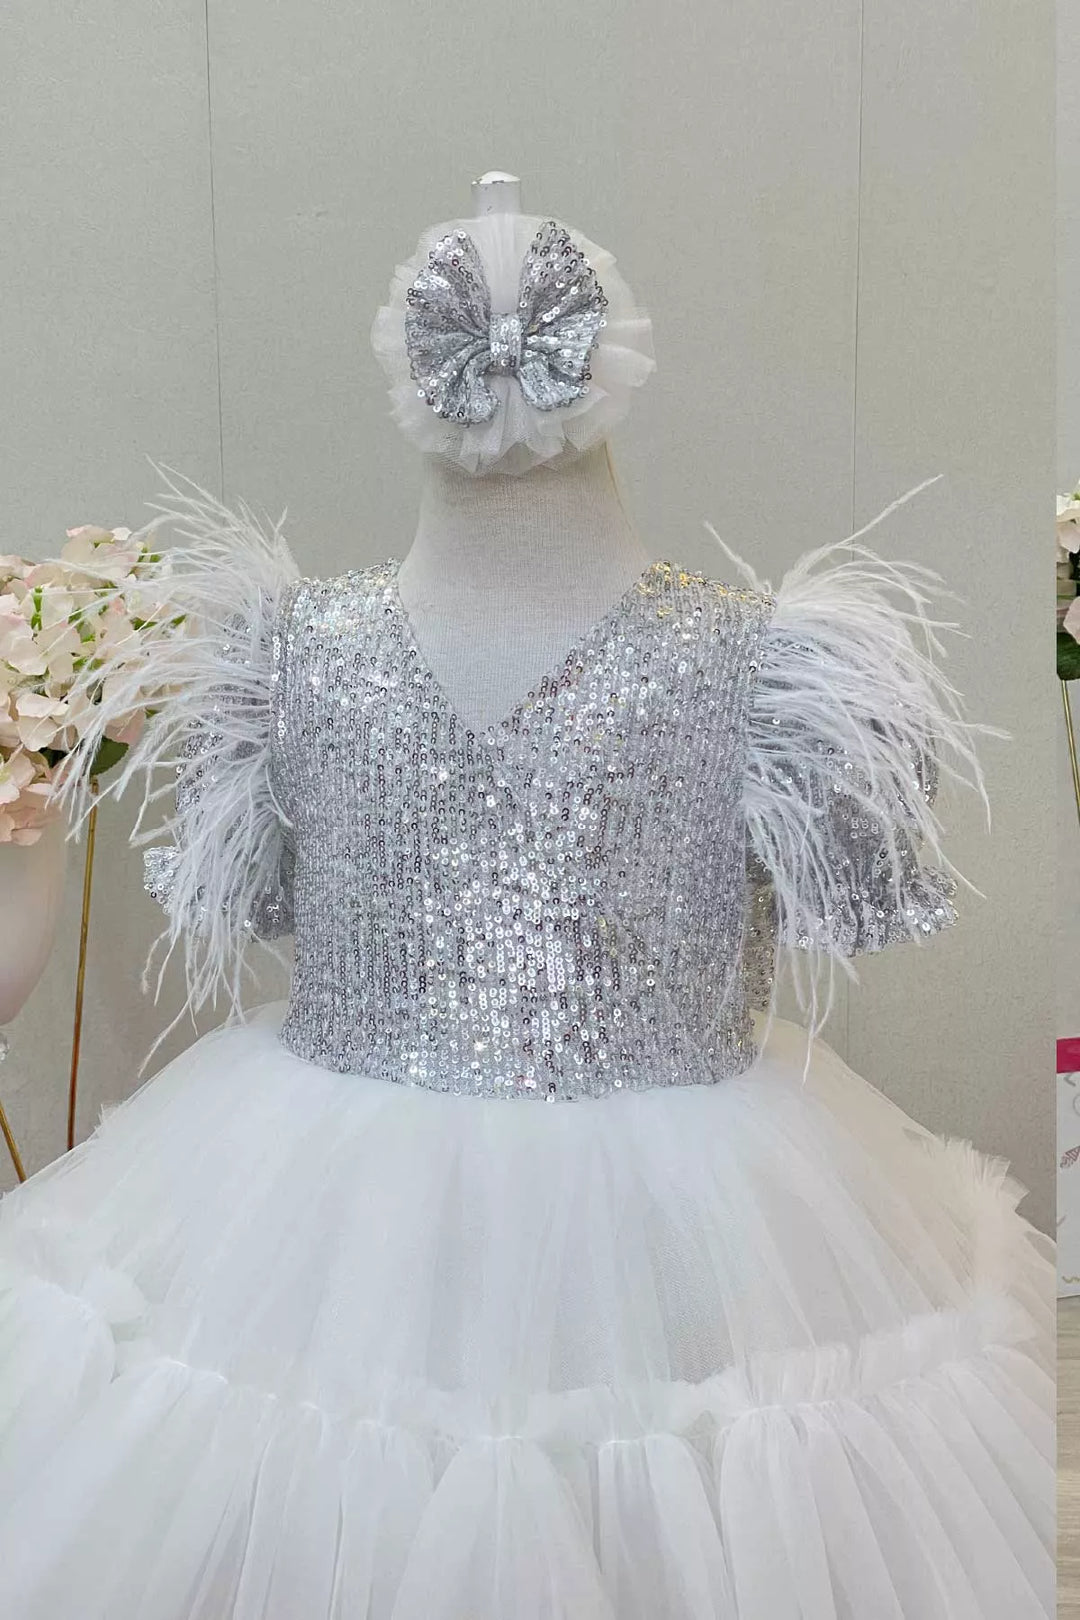 Close up view of a white girl dress that has sequins, half sleeve, feathers, V-neck, and puffy skirt